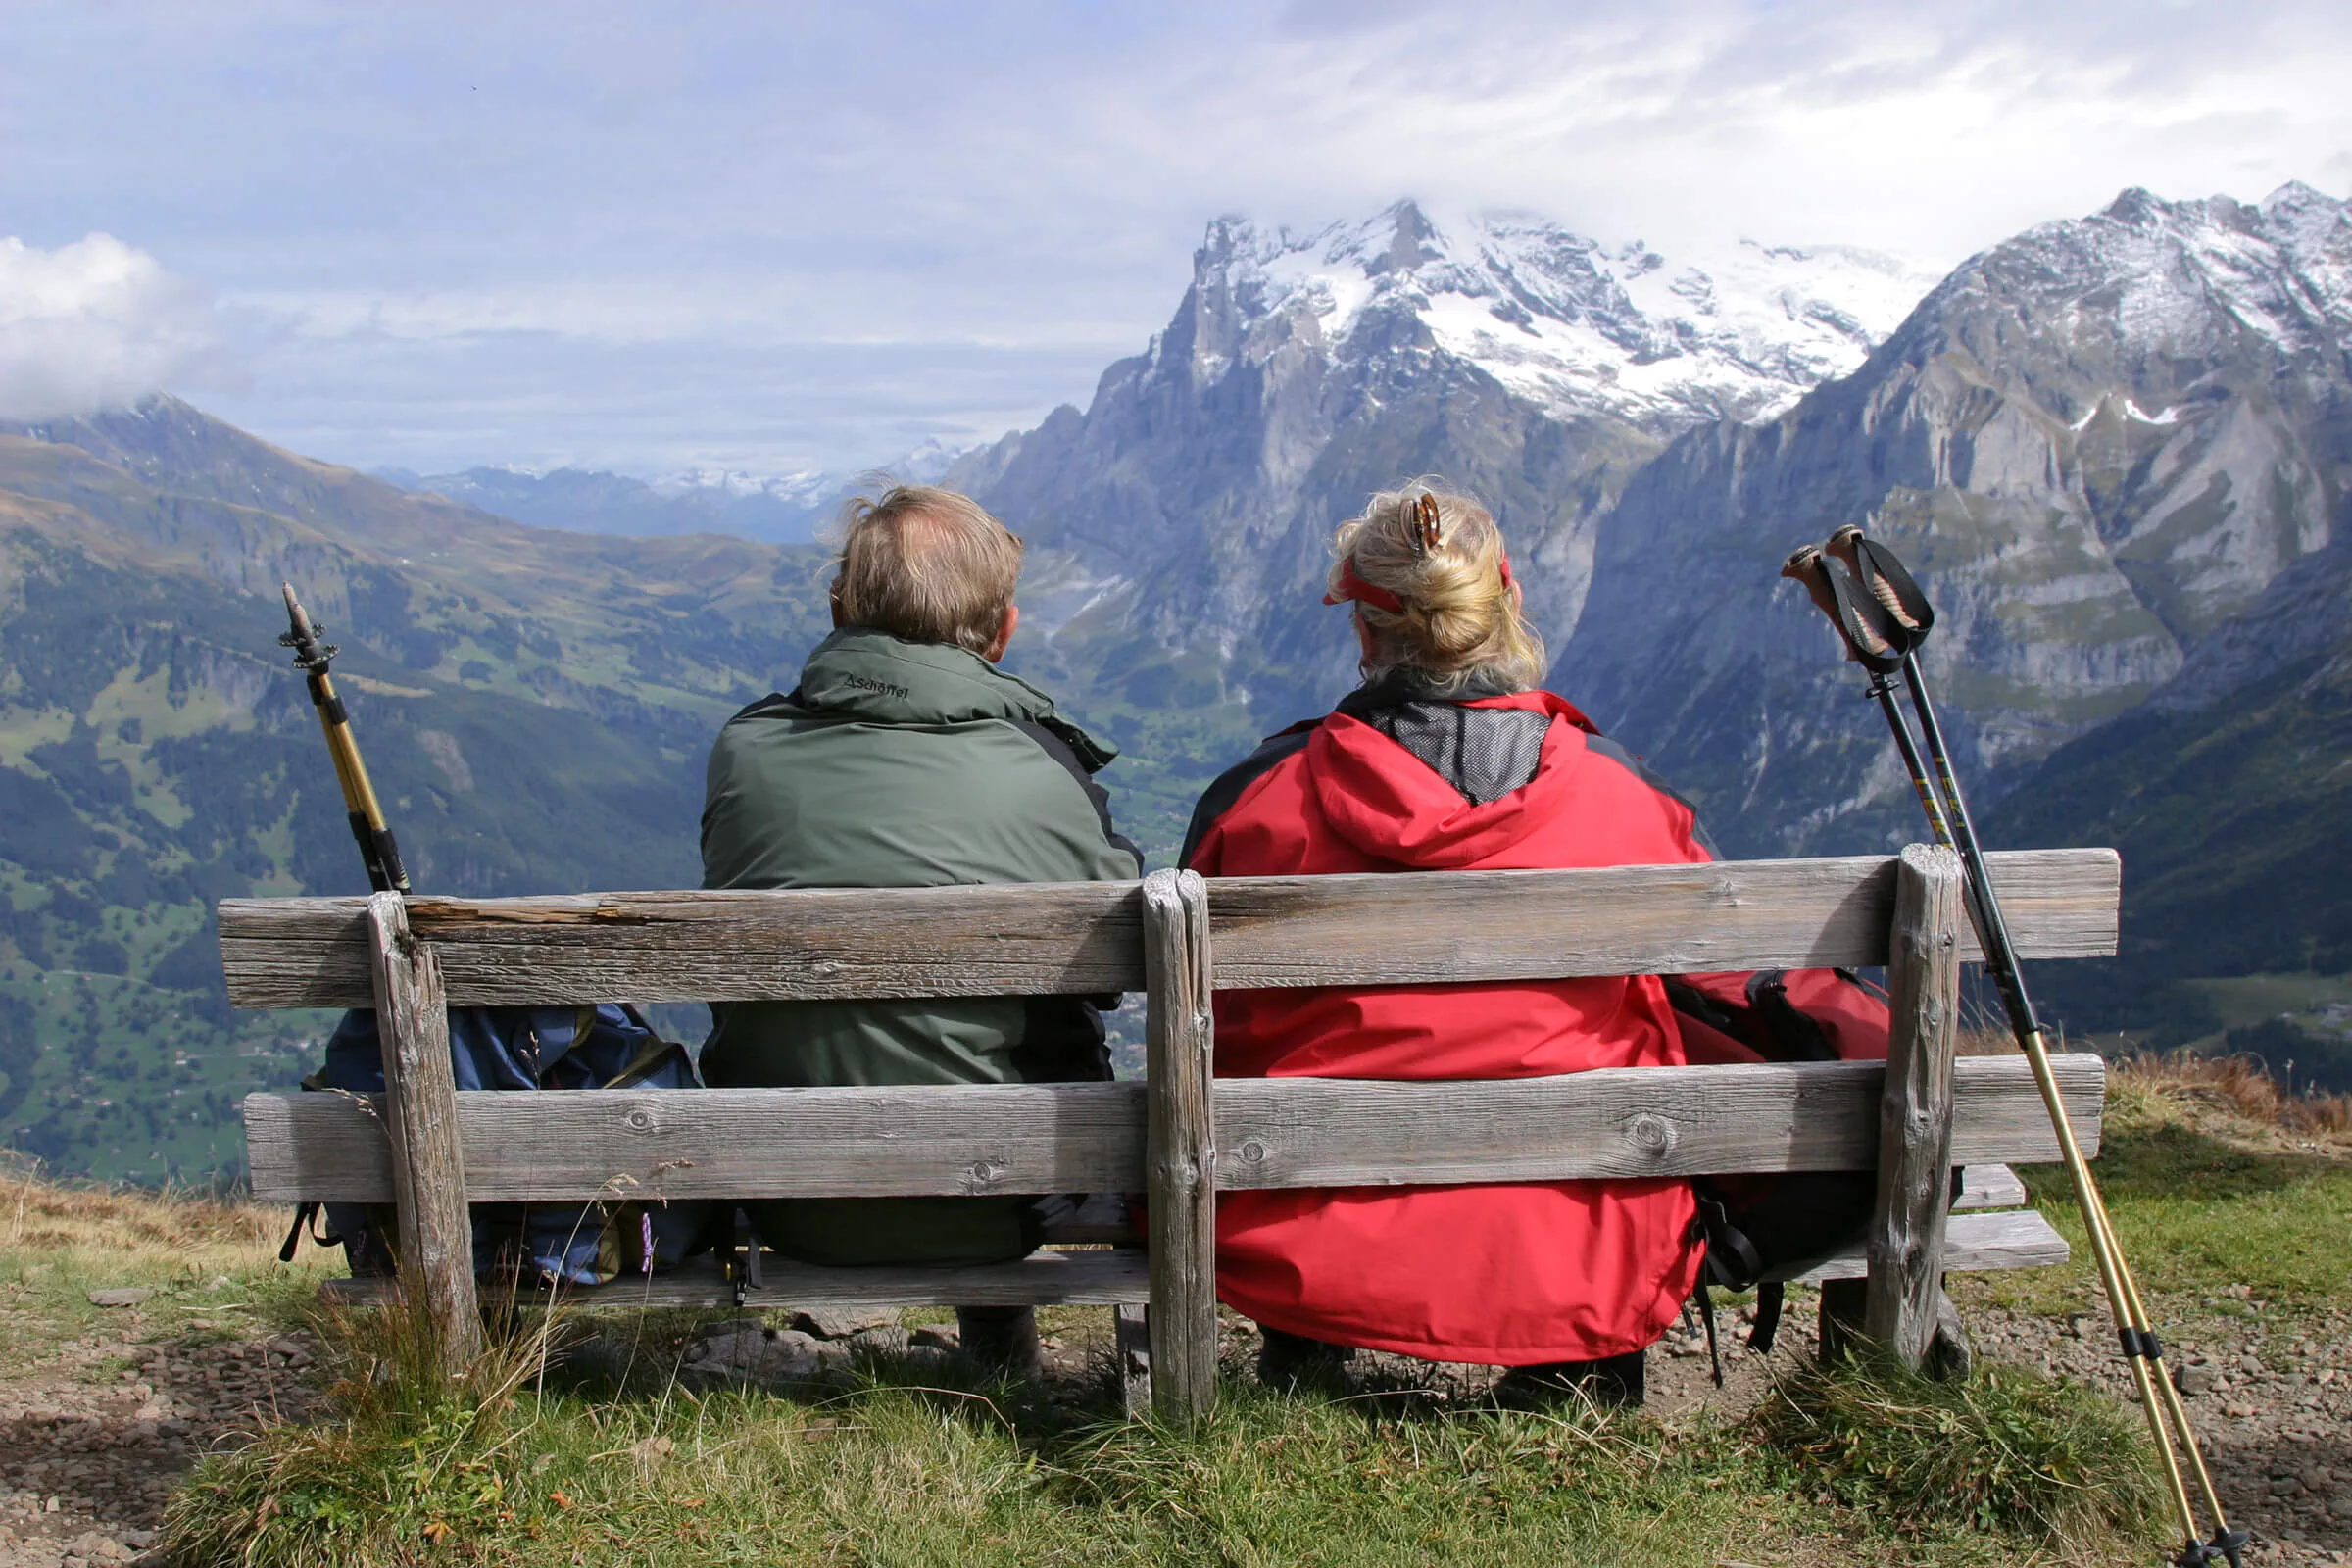 A well-situated bench rewards these hikers with a spectacular alpine panorama